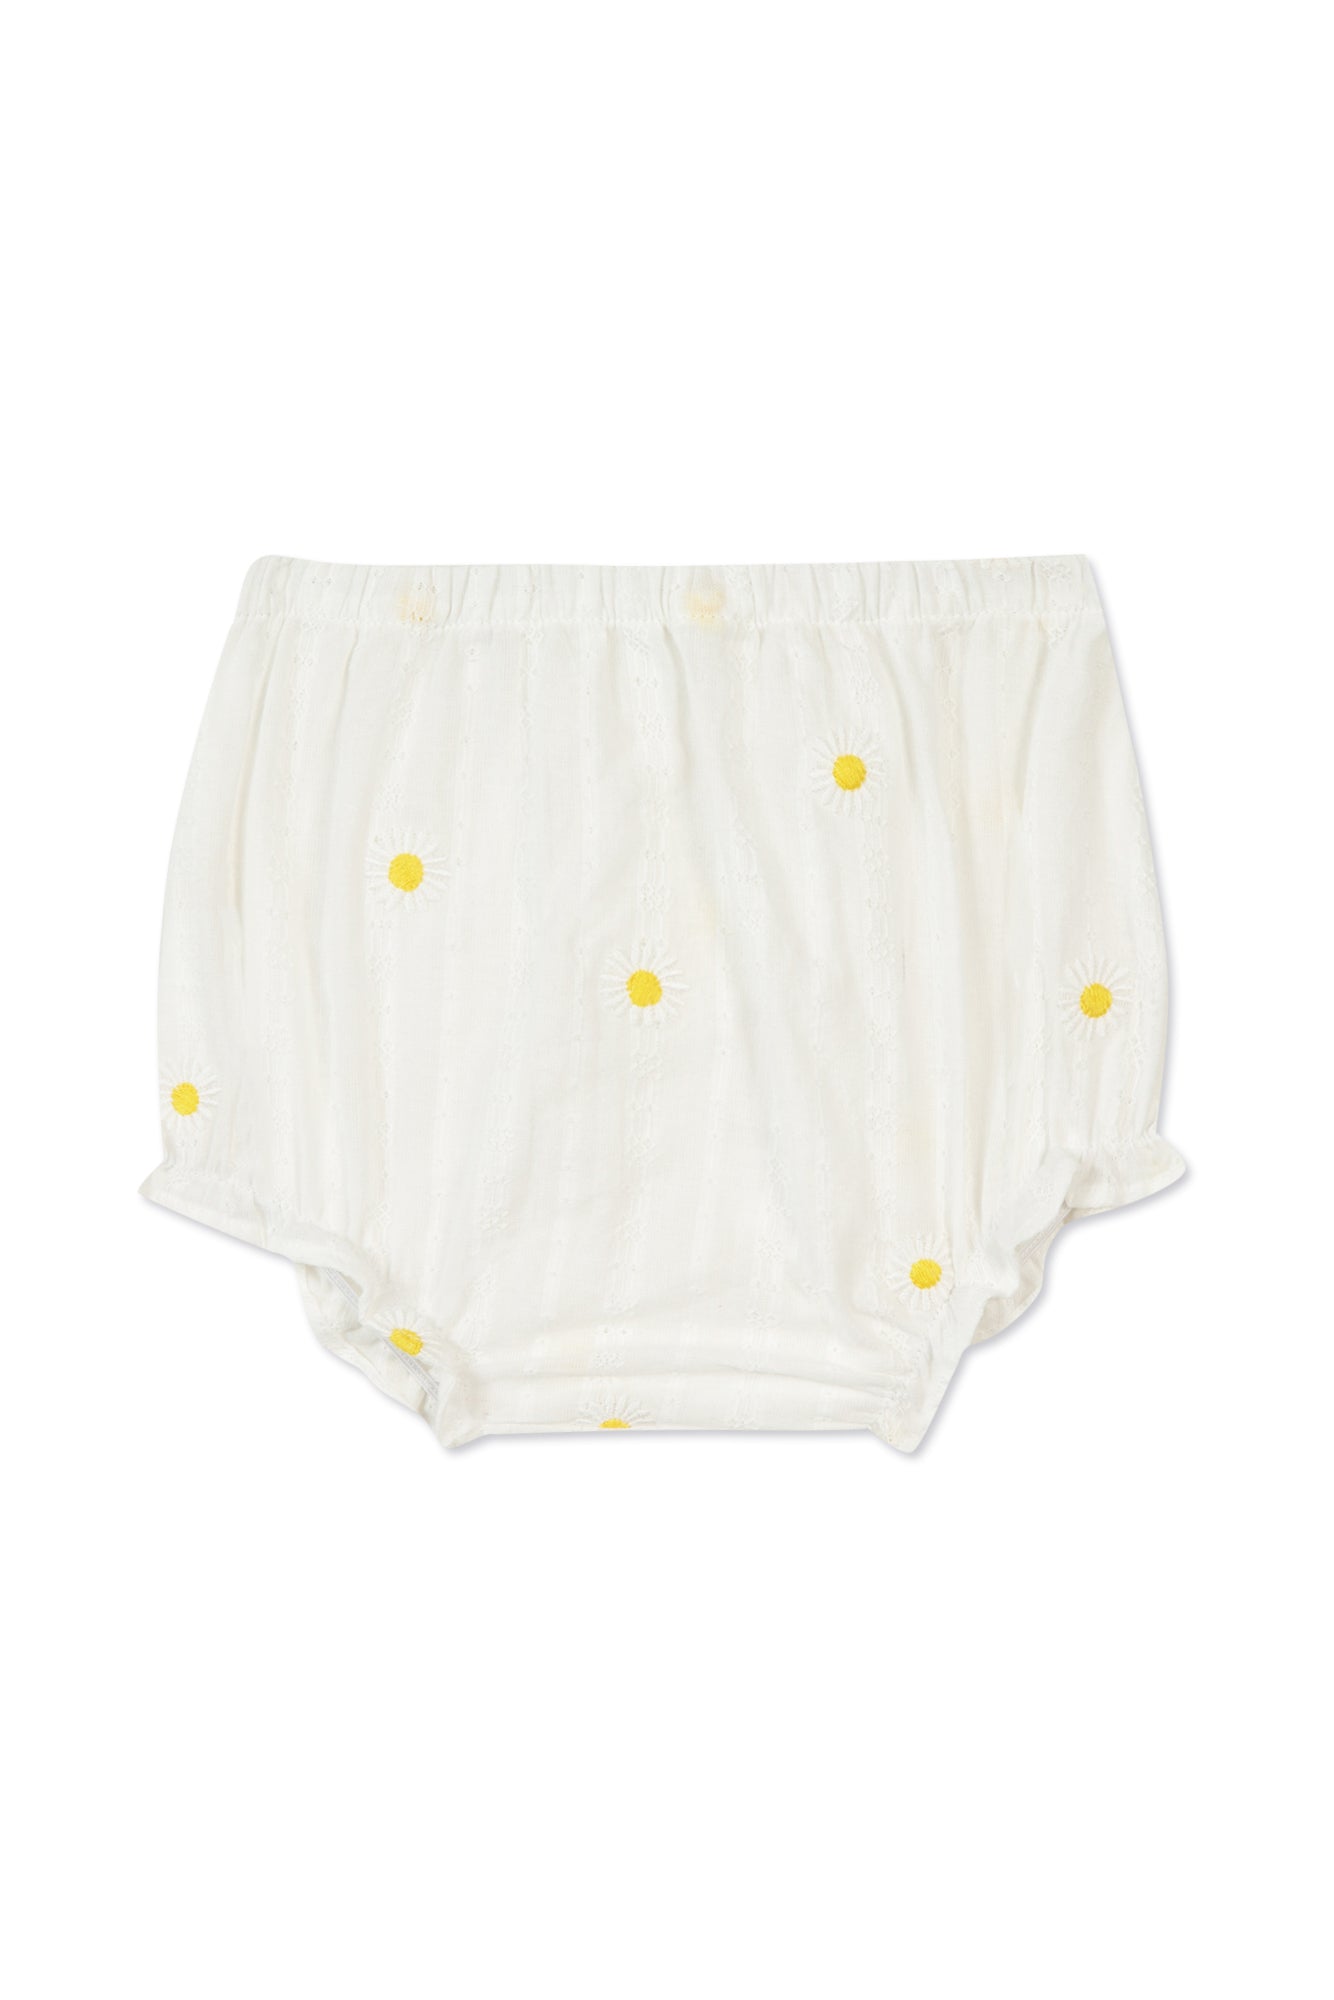 Outfit short - White margueres Embroideredes White / 6M